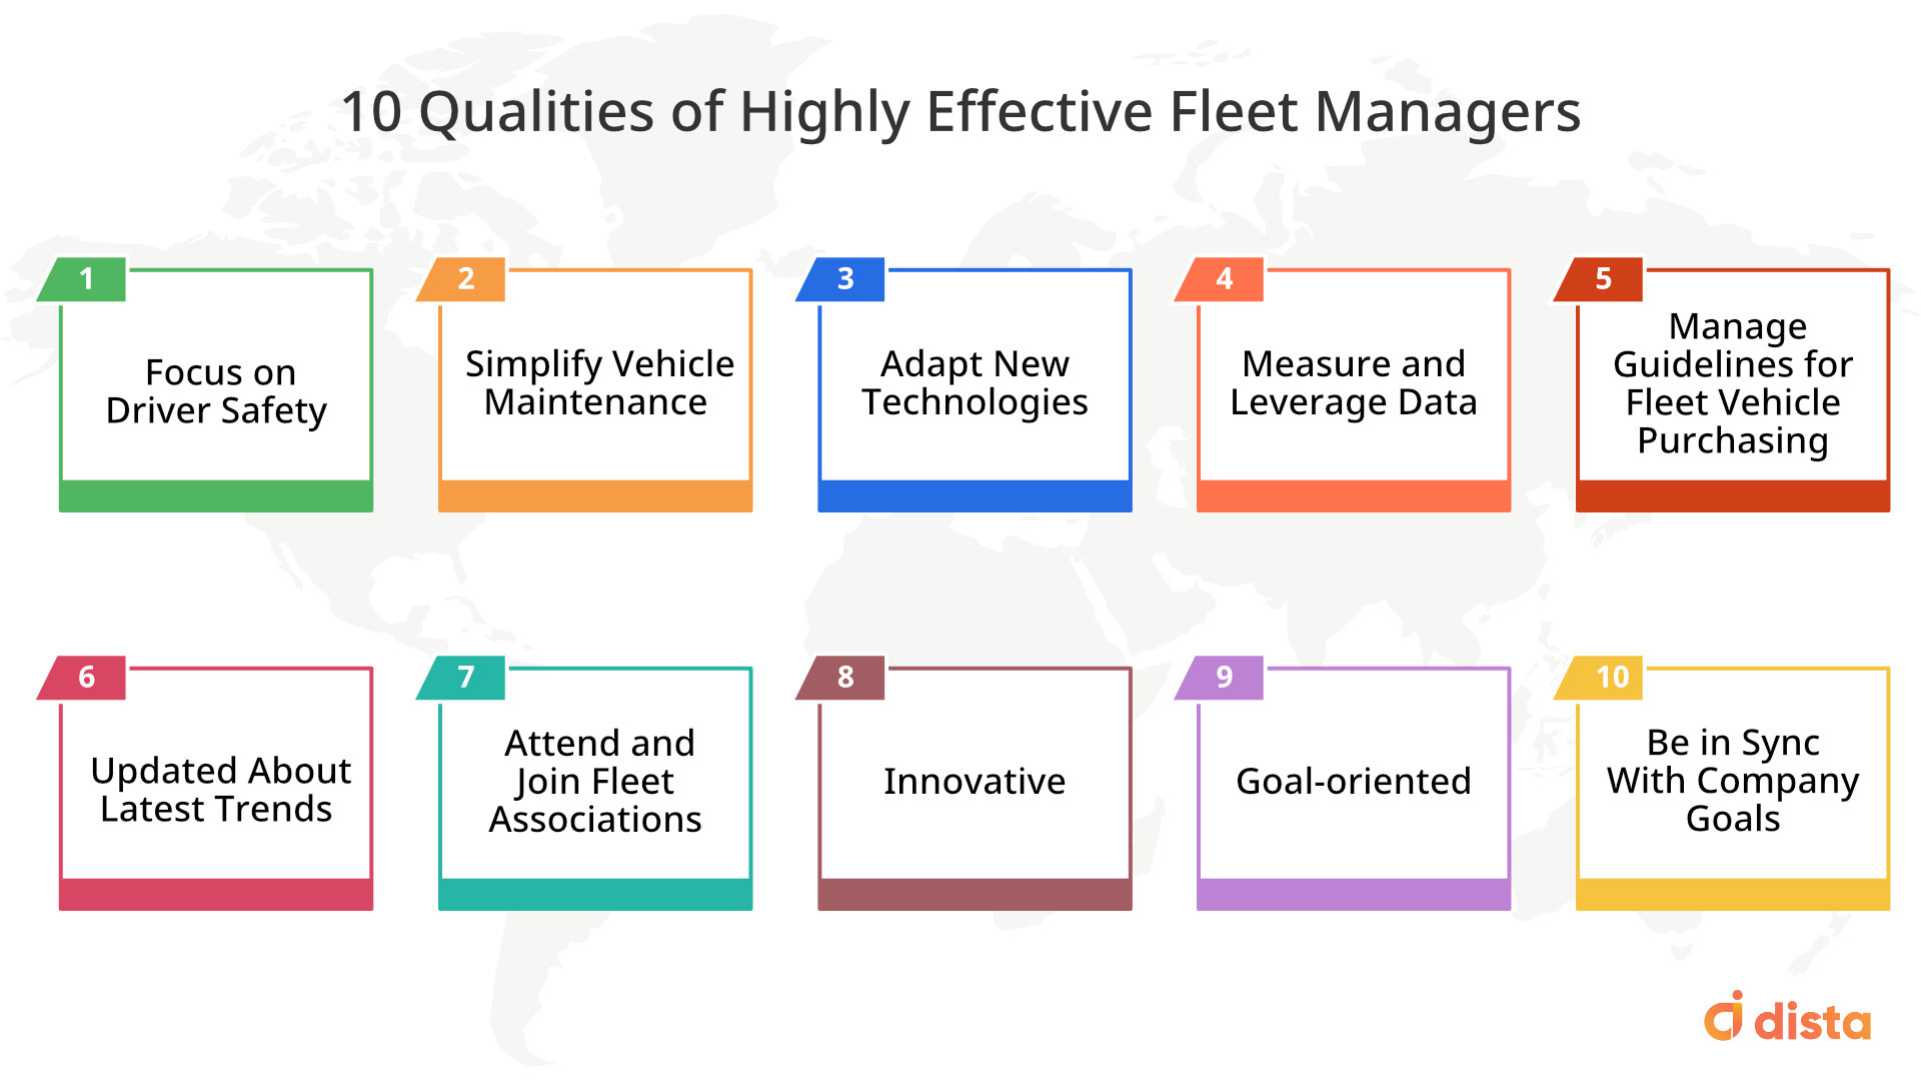 10 Qualities of Highly Effective Fleet Managers